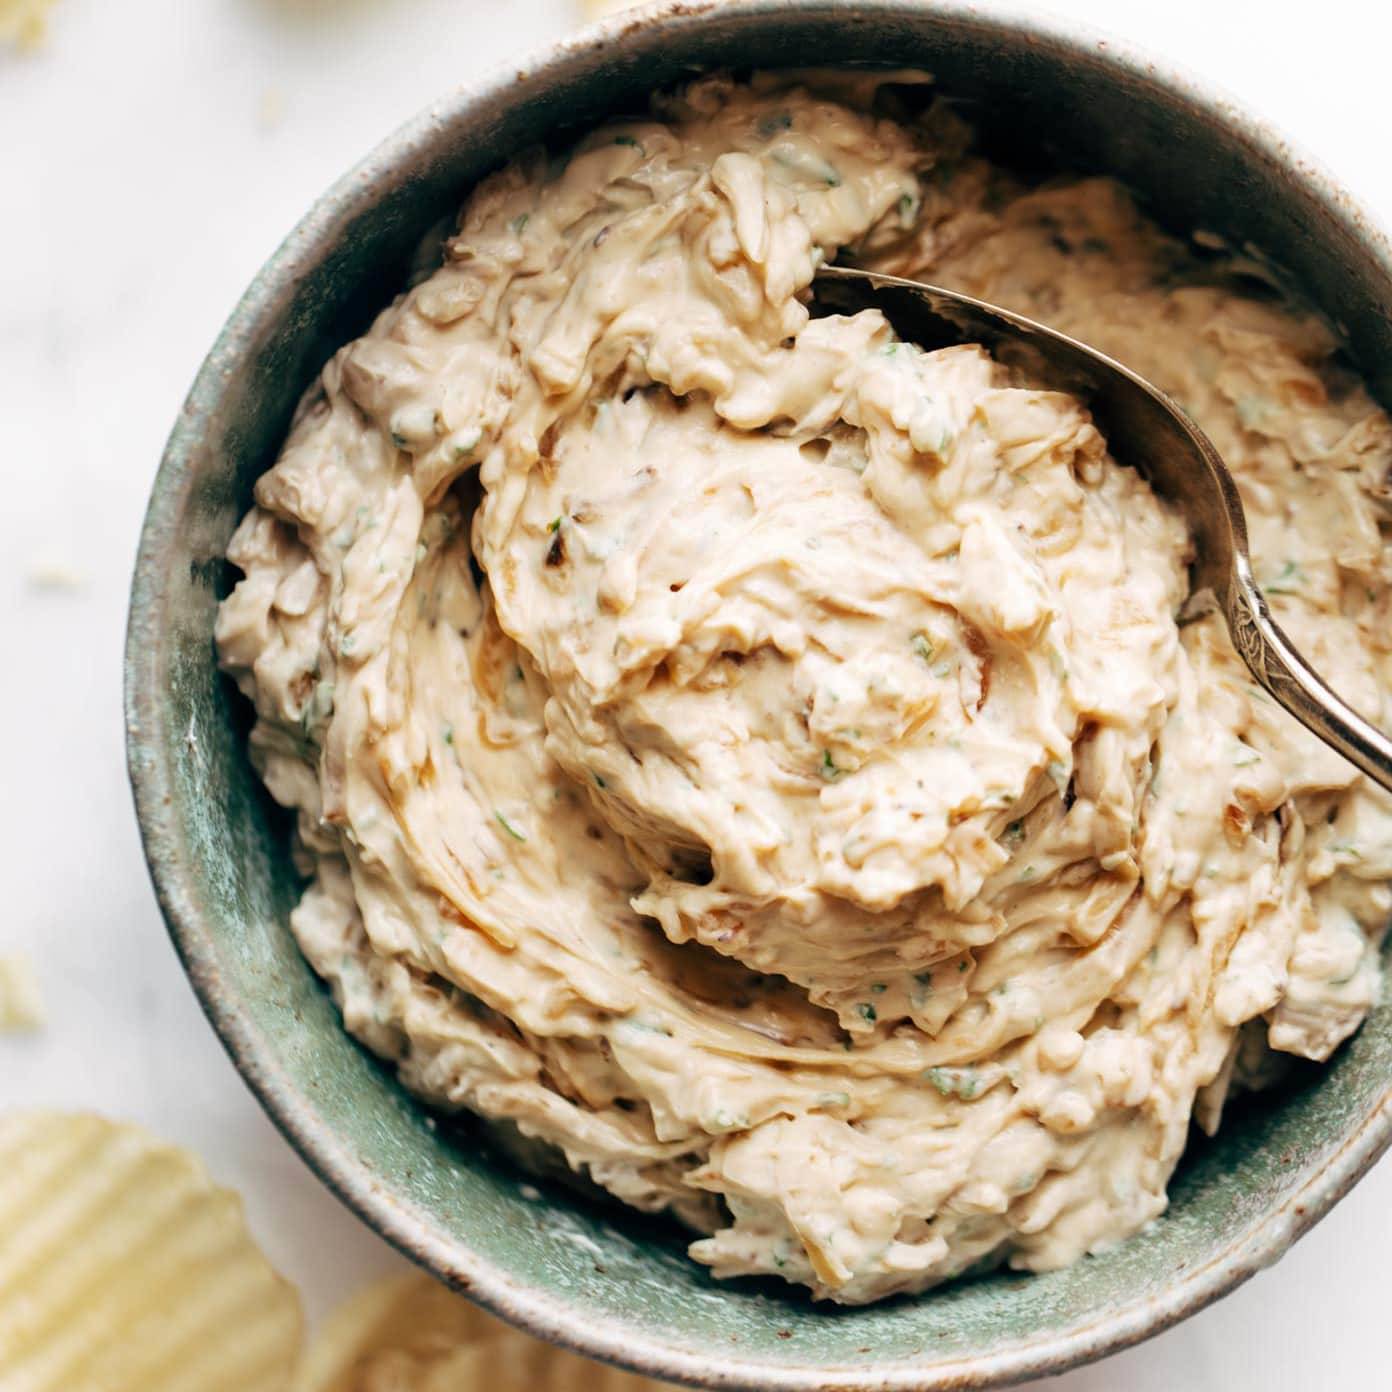 A large rustic bowl of onion dip.